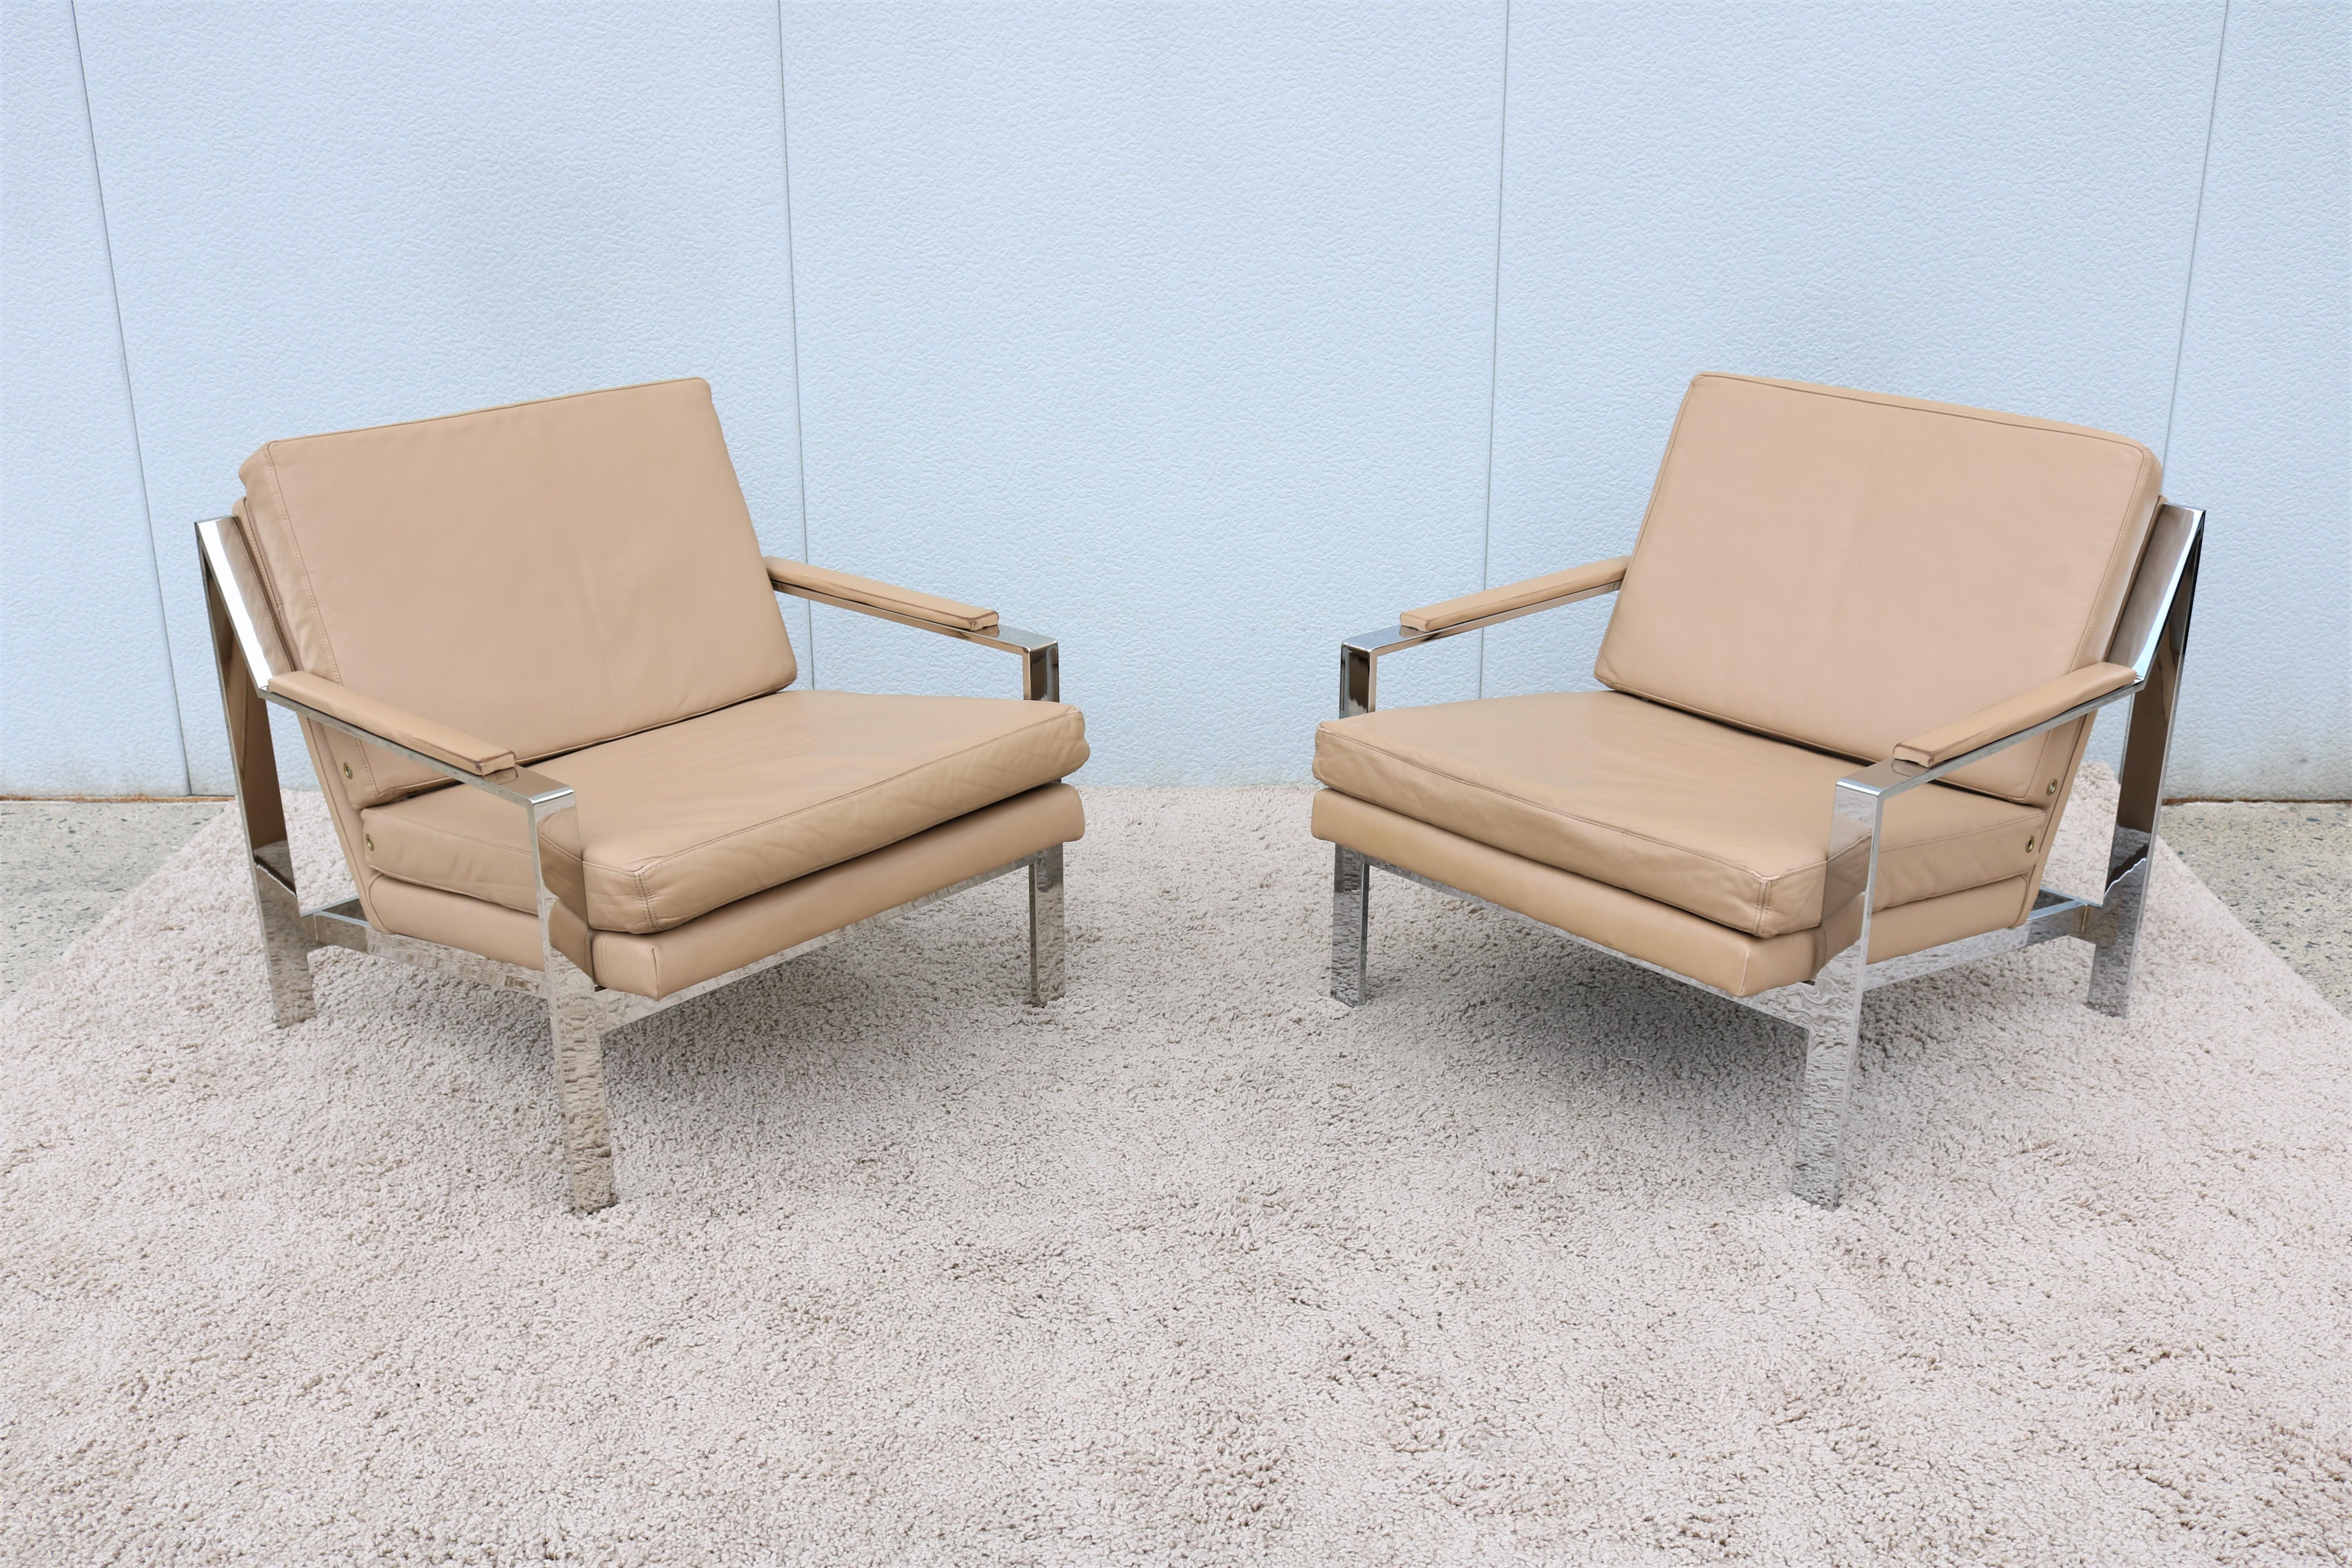 Stunning vintage pair of chrome and leather lounge chairs by Cy Mann in the style of Milo Baughman. 
This pair are upholstered in high quality aniline dyed Italian leather by Spinneybeck the world's leading supplier of quality leather.
Iconic and